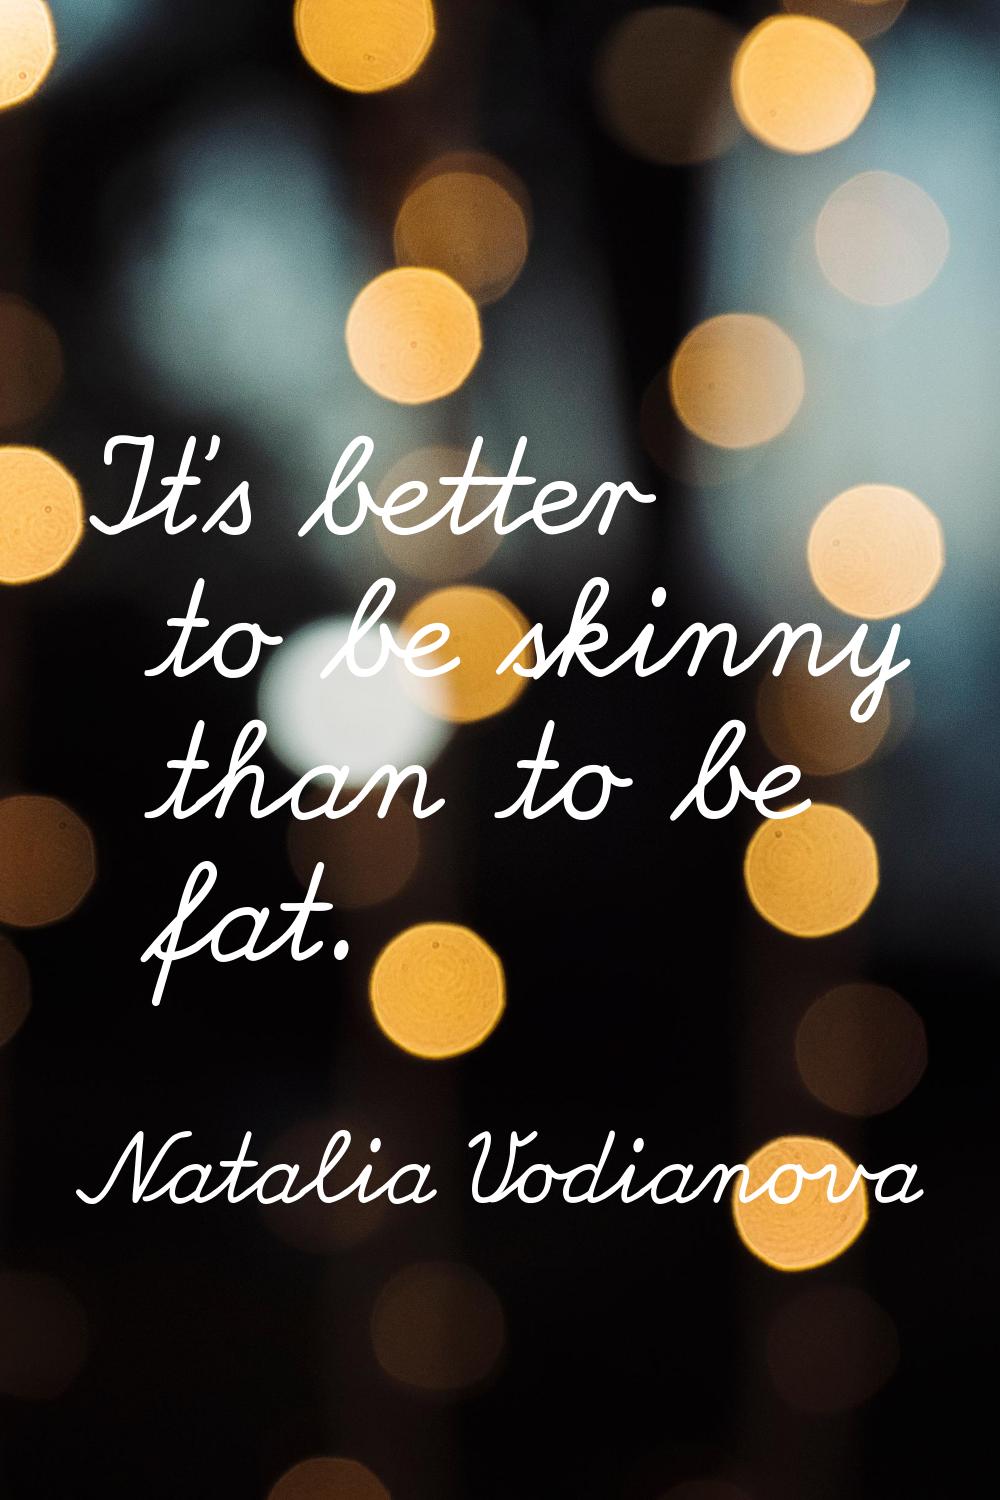 It's better to be skinny than to be fat.